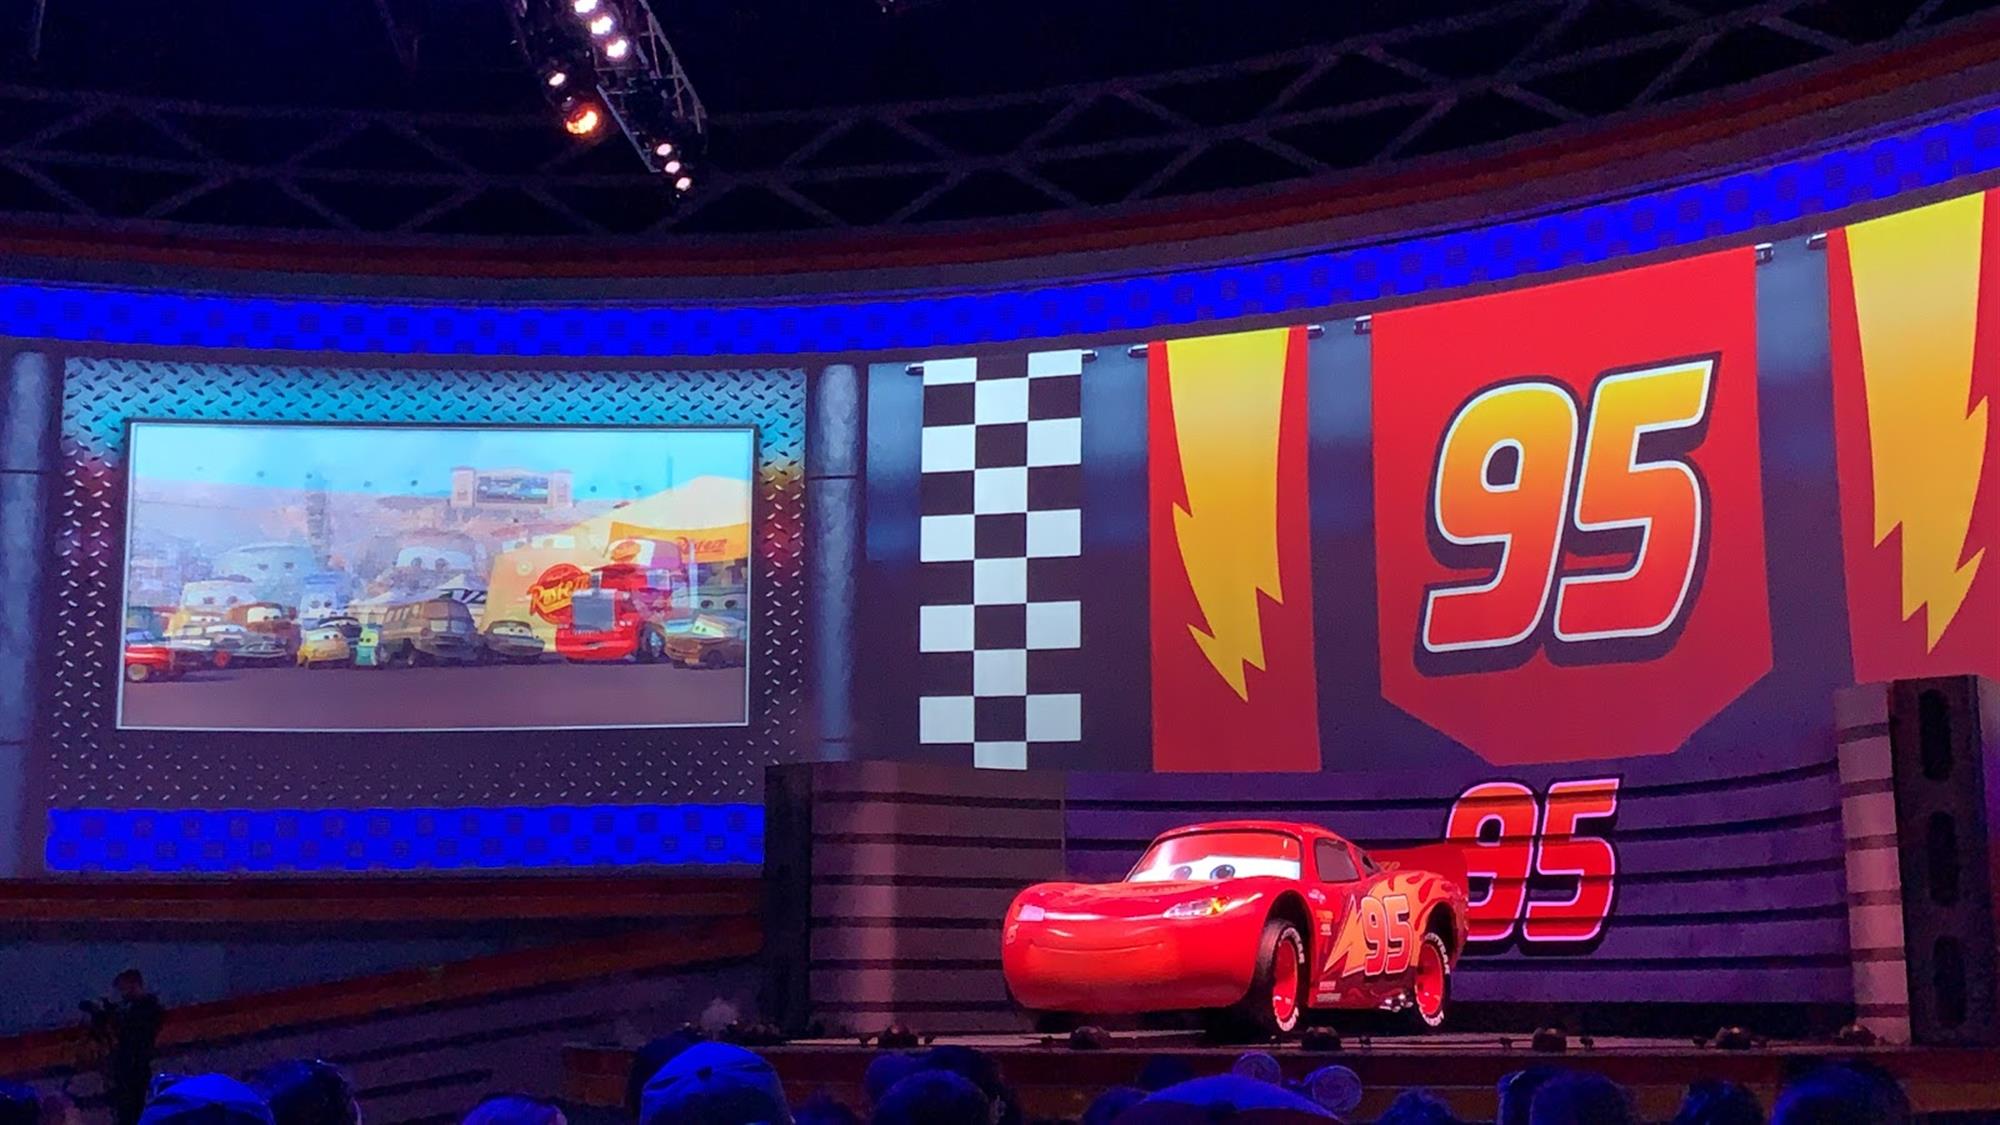 Live Video - Let's experience Lightning McQueen Racing Academy at